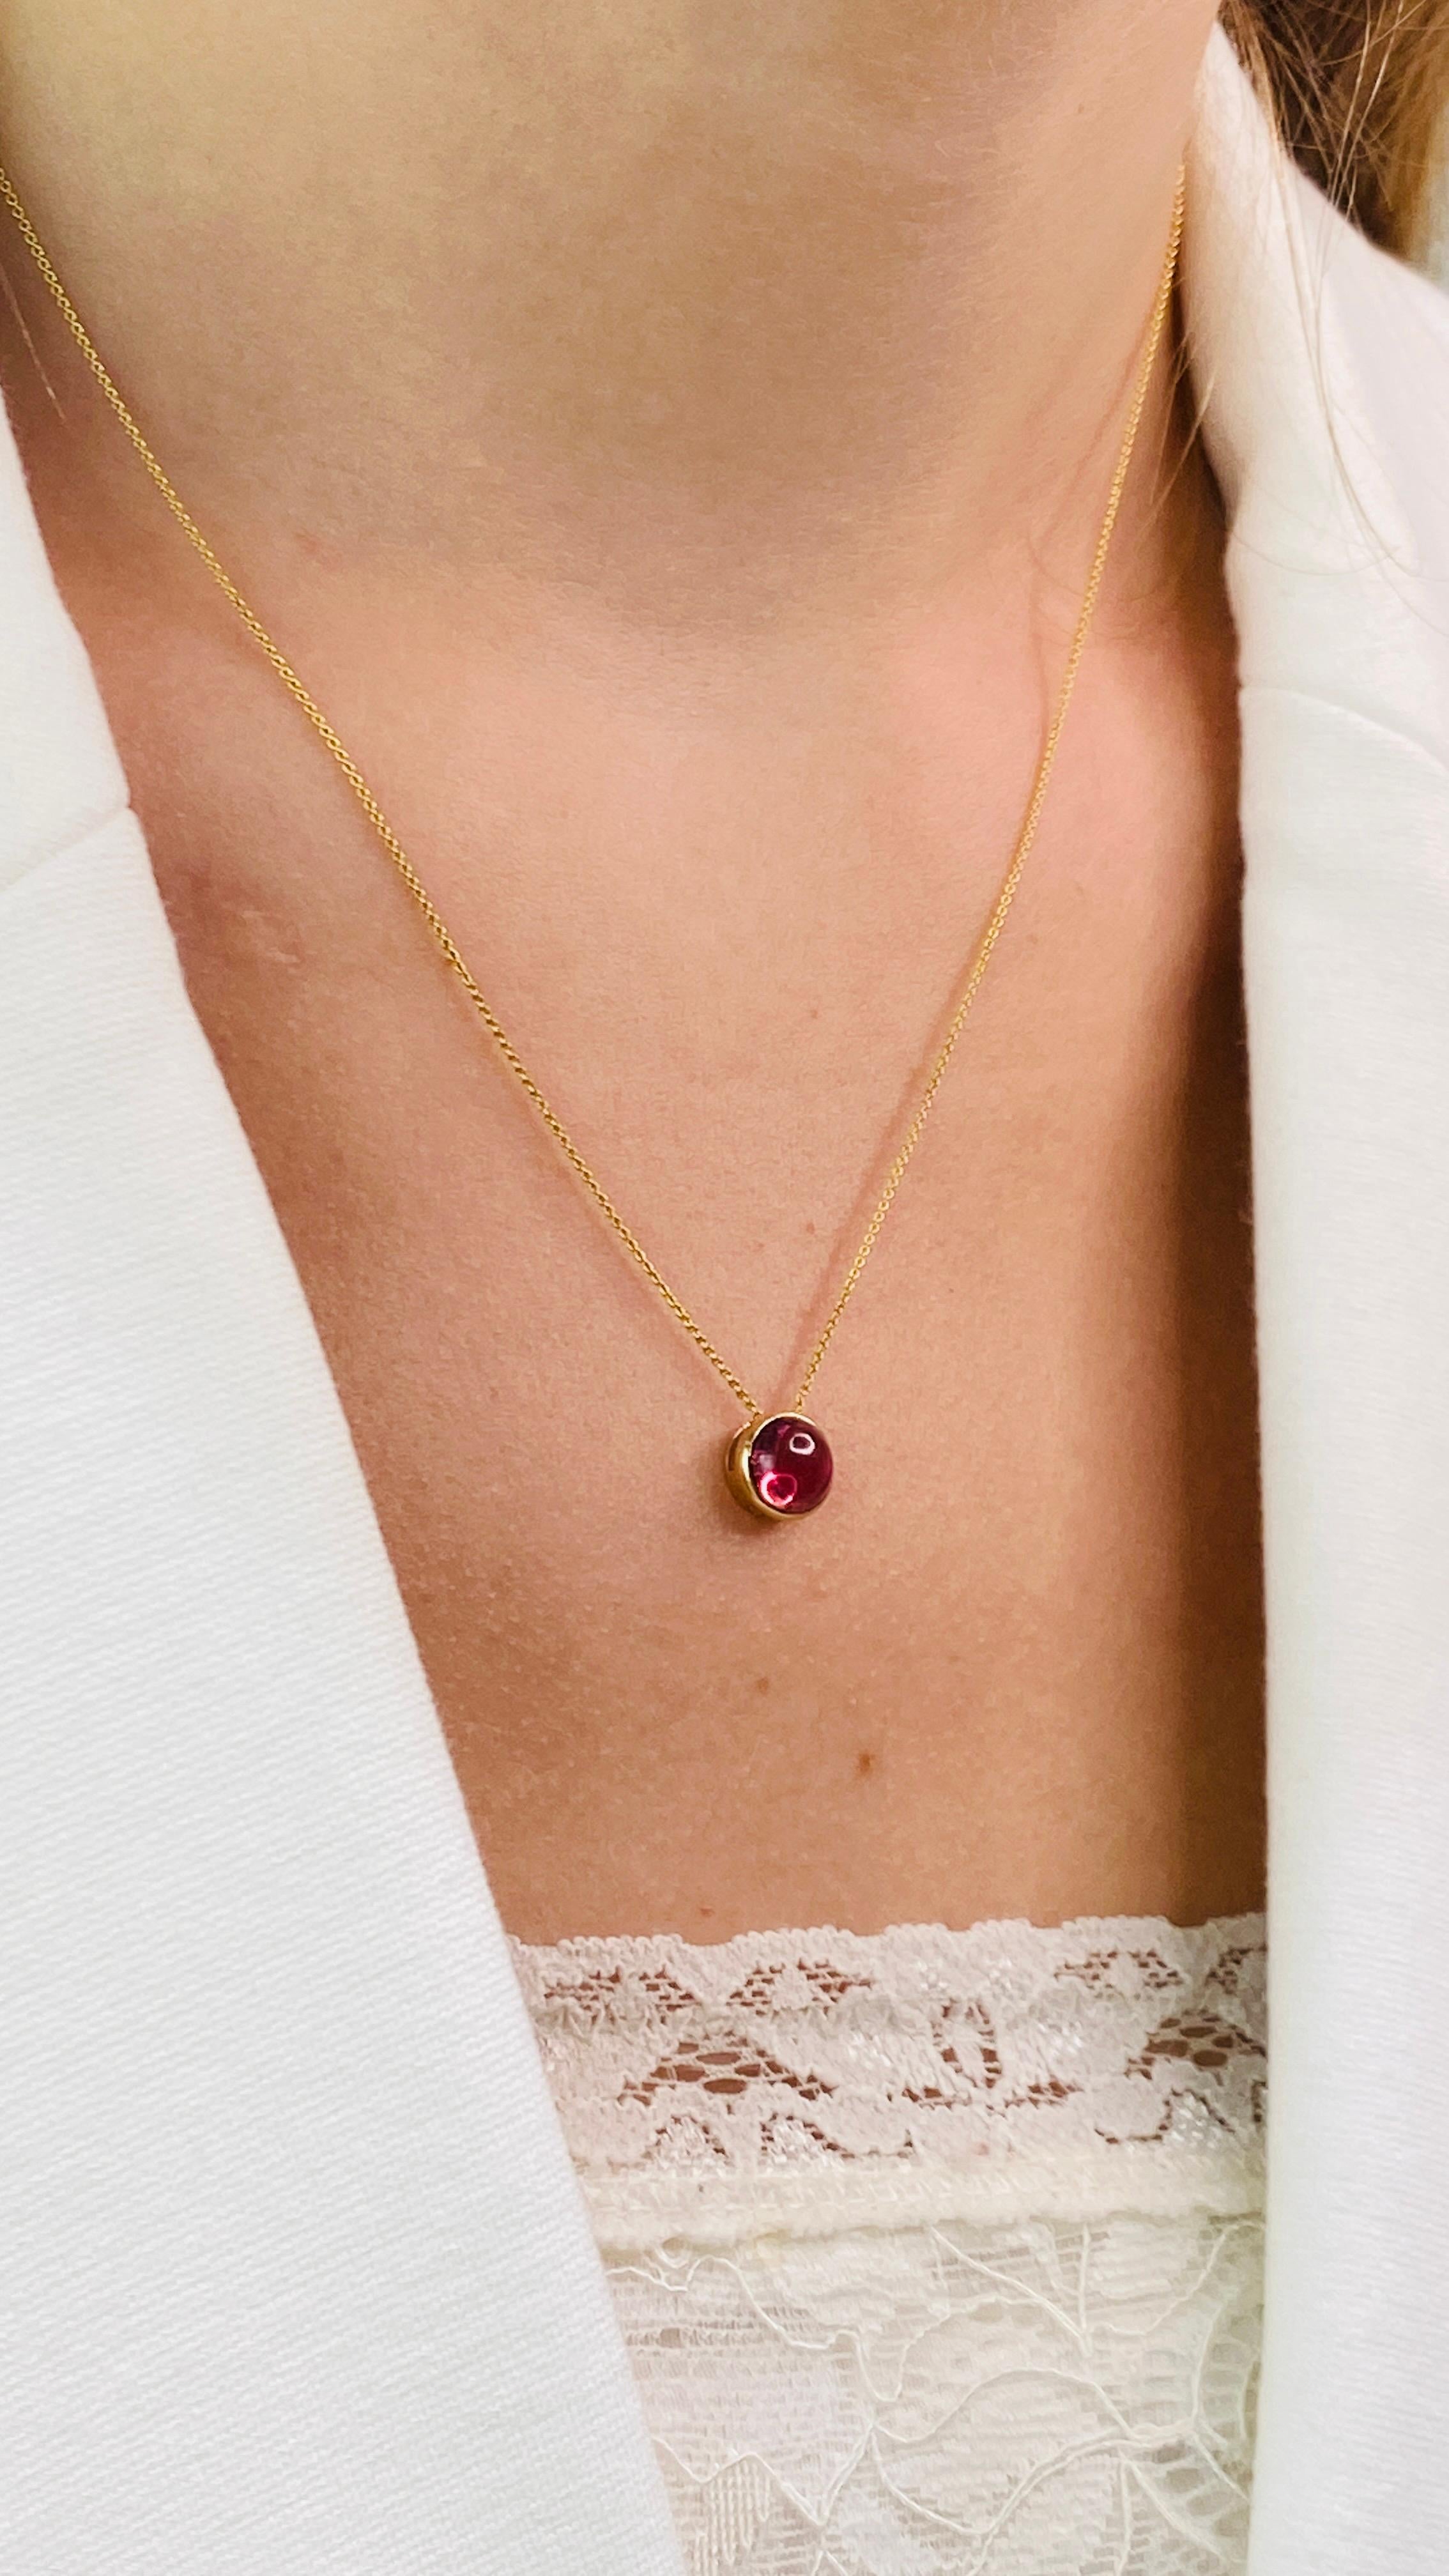 Tresor Beautiful Pendant feature 1.67 carats of Pink Tourmaline. The Pendant is an ode to the luxurious yet classic beauty with sparkly gemstones and feminine hues. Their contemporary and modern design make them perfect and versatile to be worn at